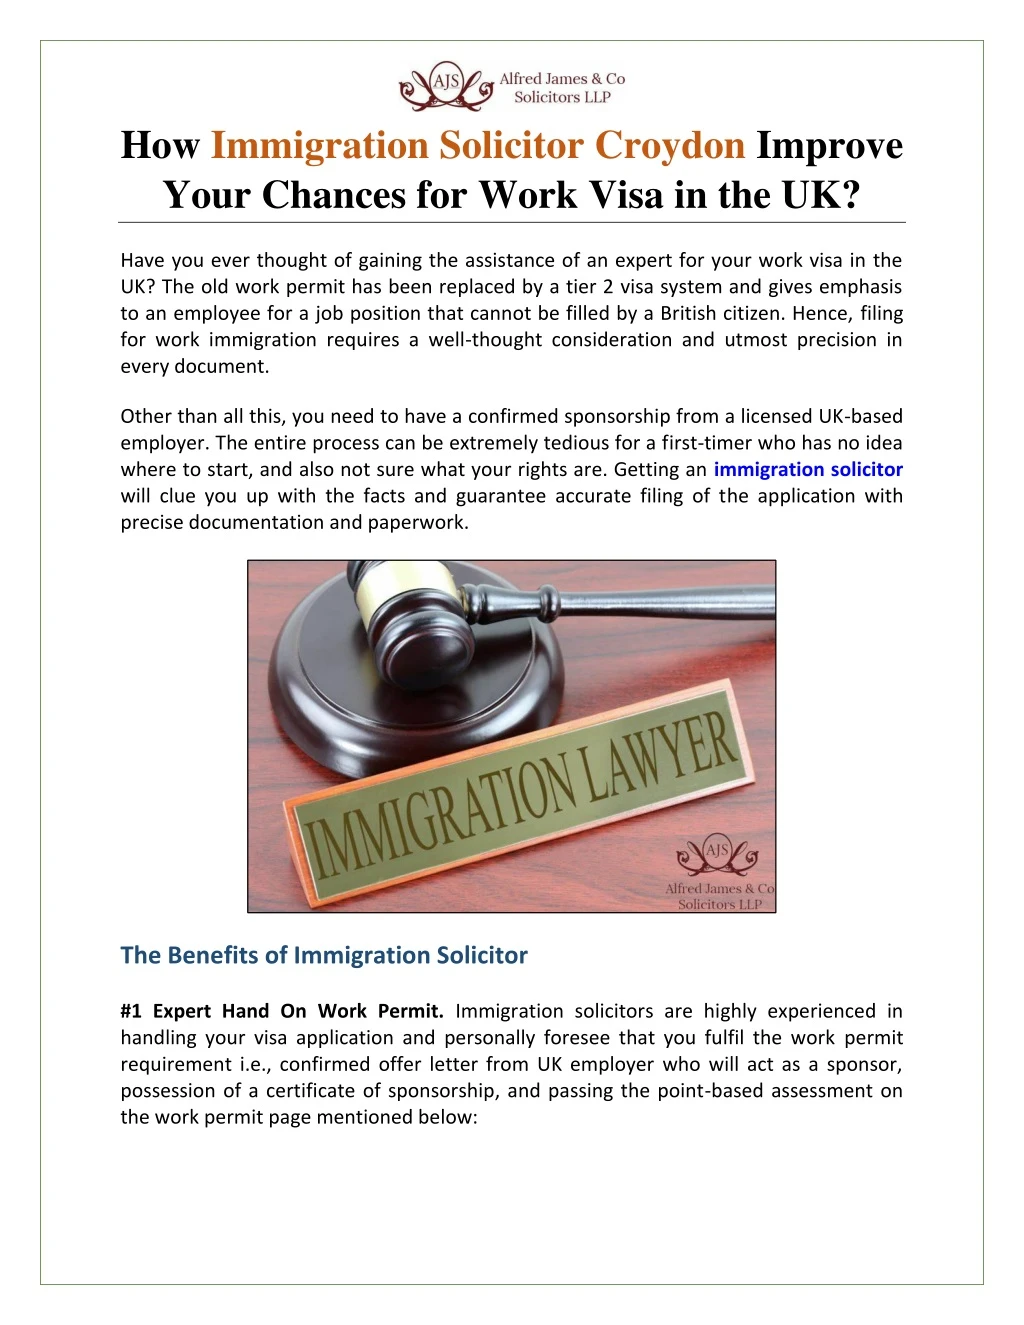 how immigration solicitor croydon improve your